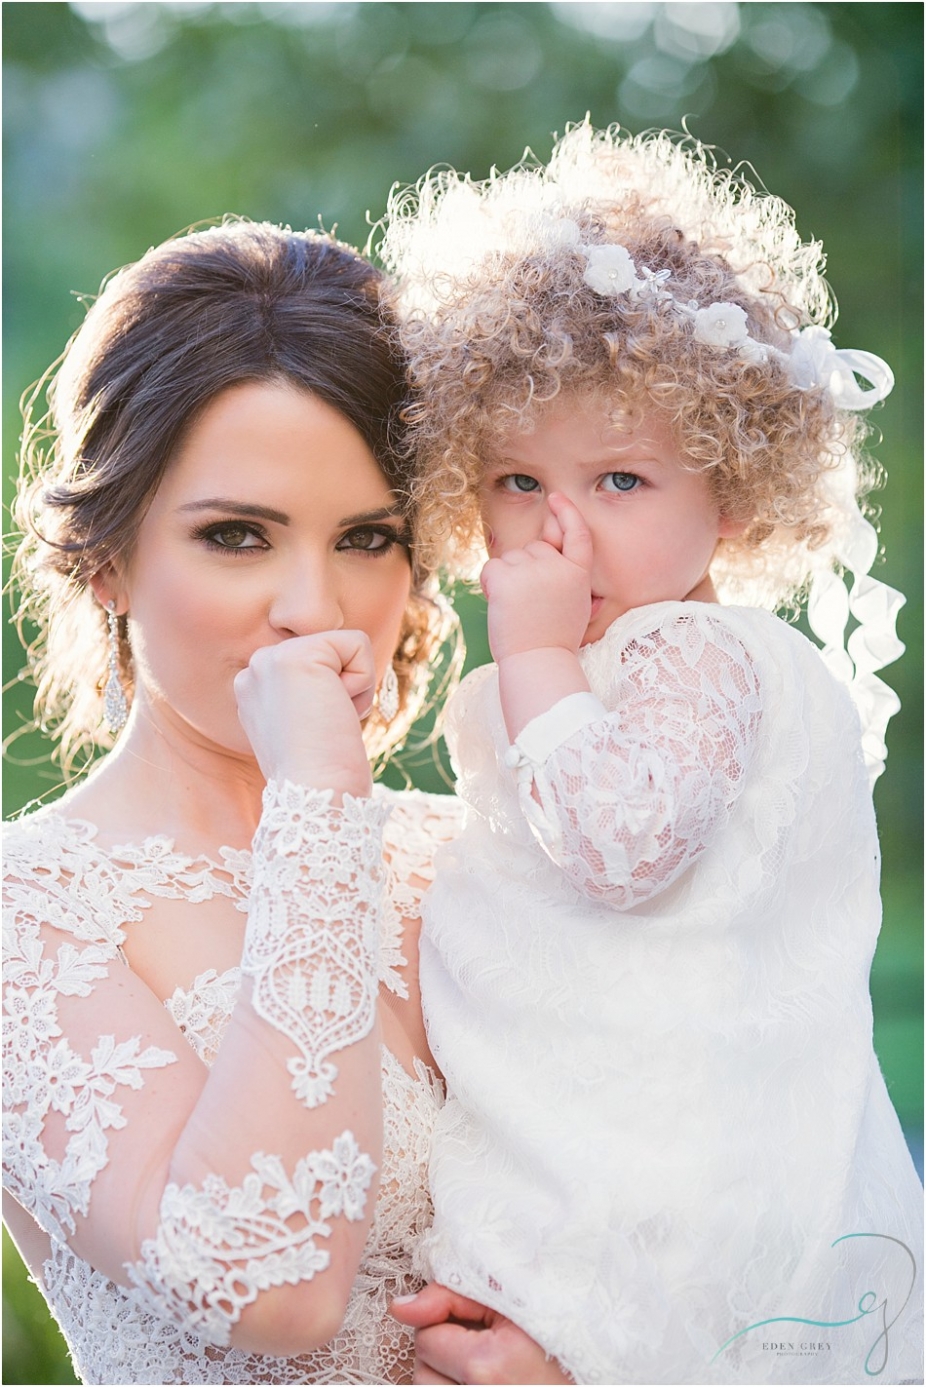 Every bride needs THIS flower girl!